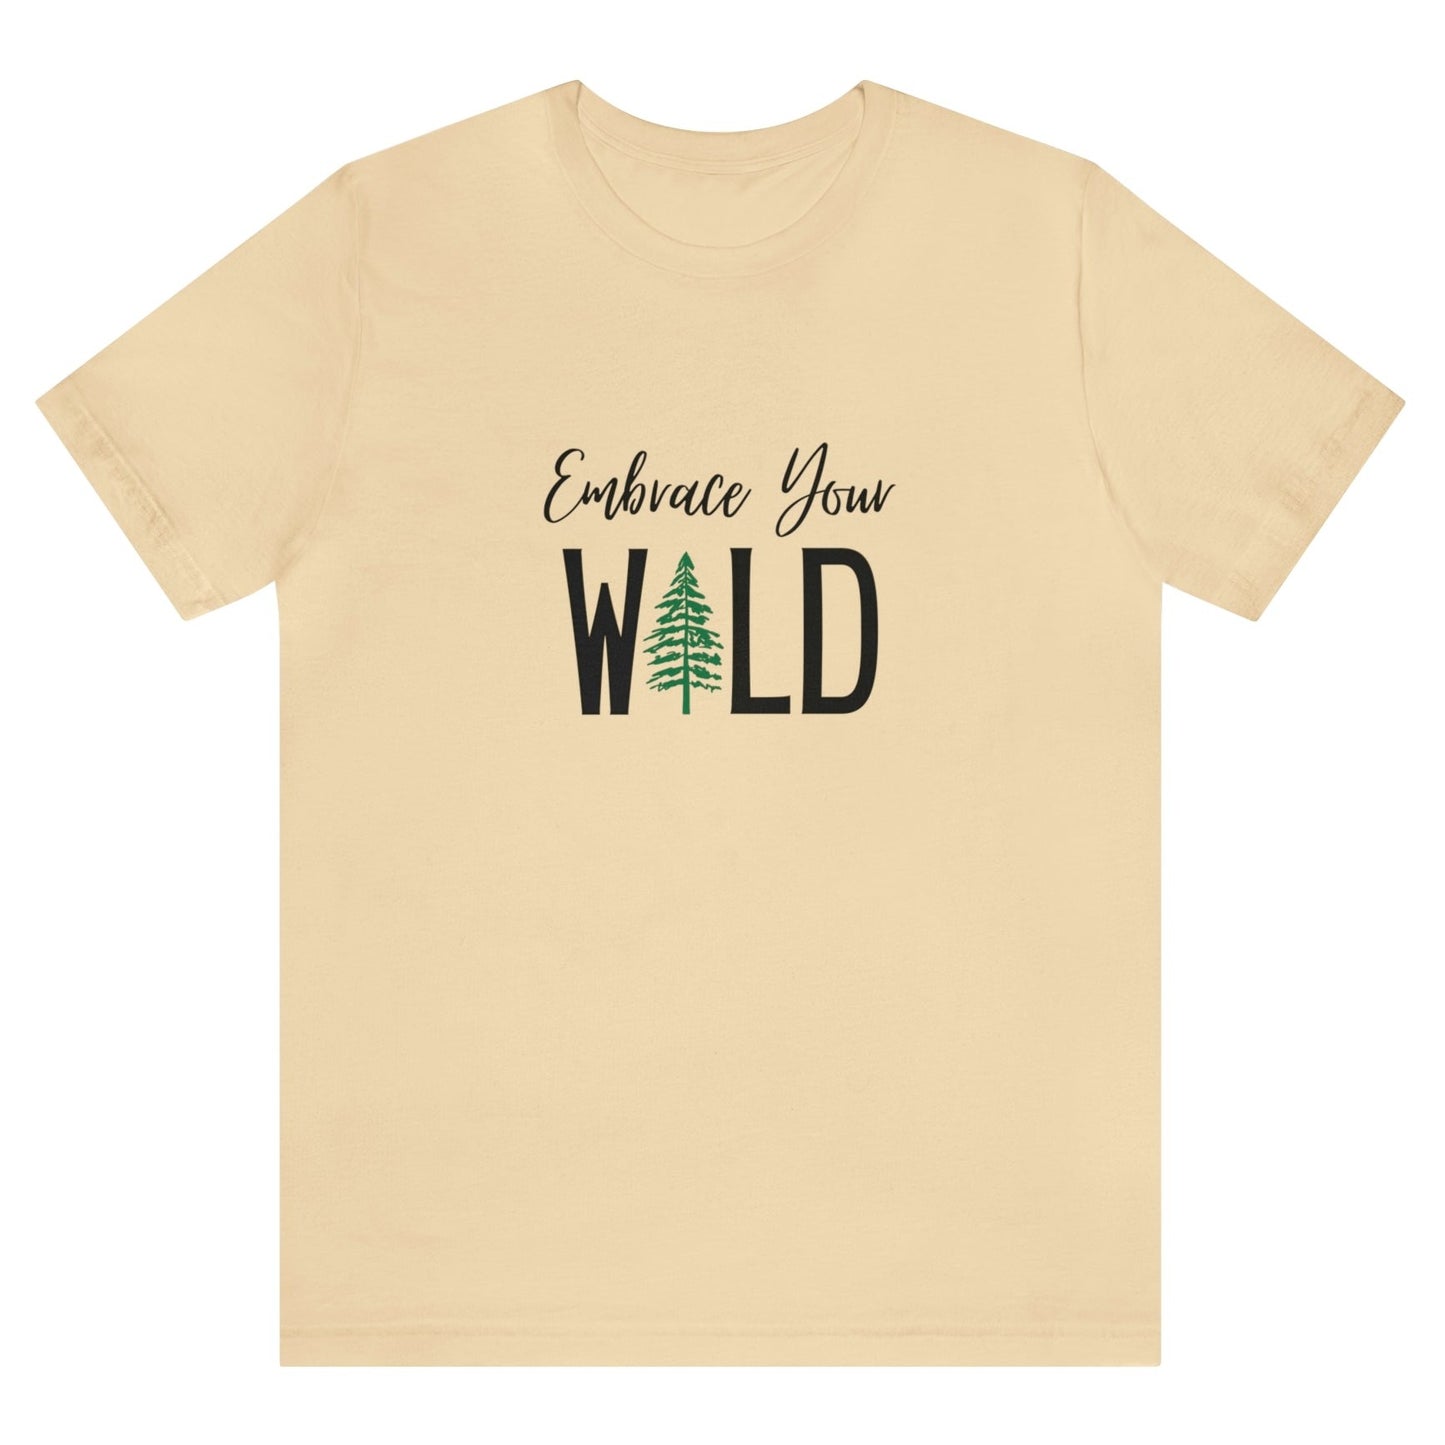 embrace-your-wild-with-tree-graphic-soft-cream-t-shirt-womens-outdoors